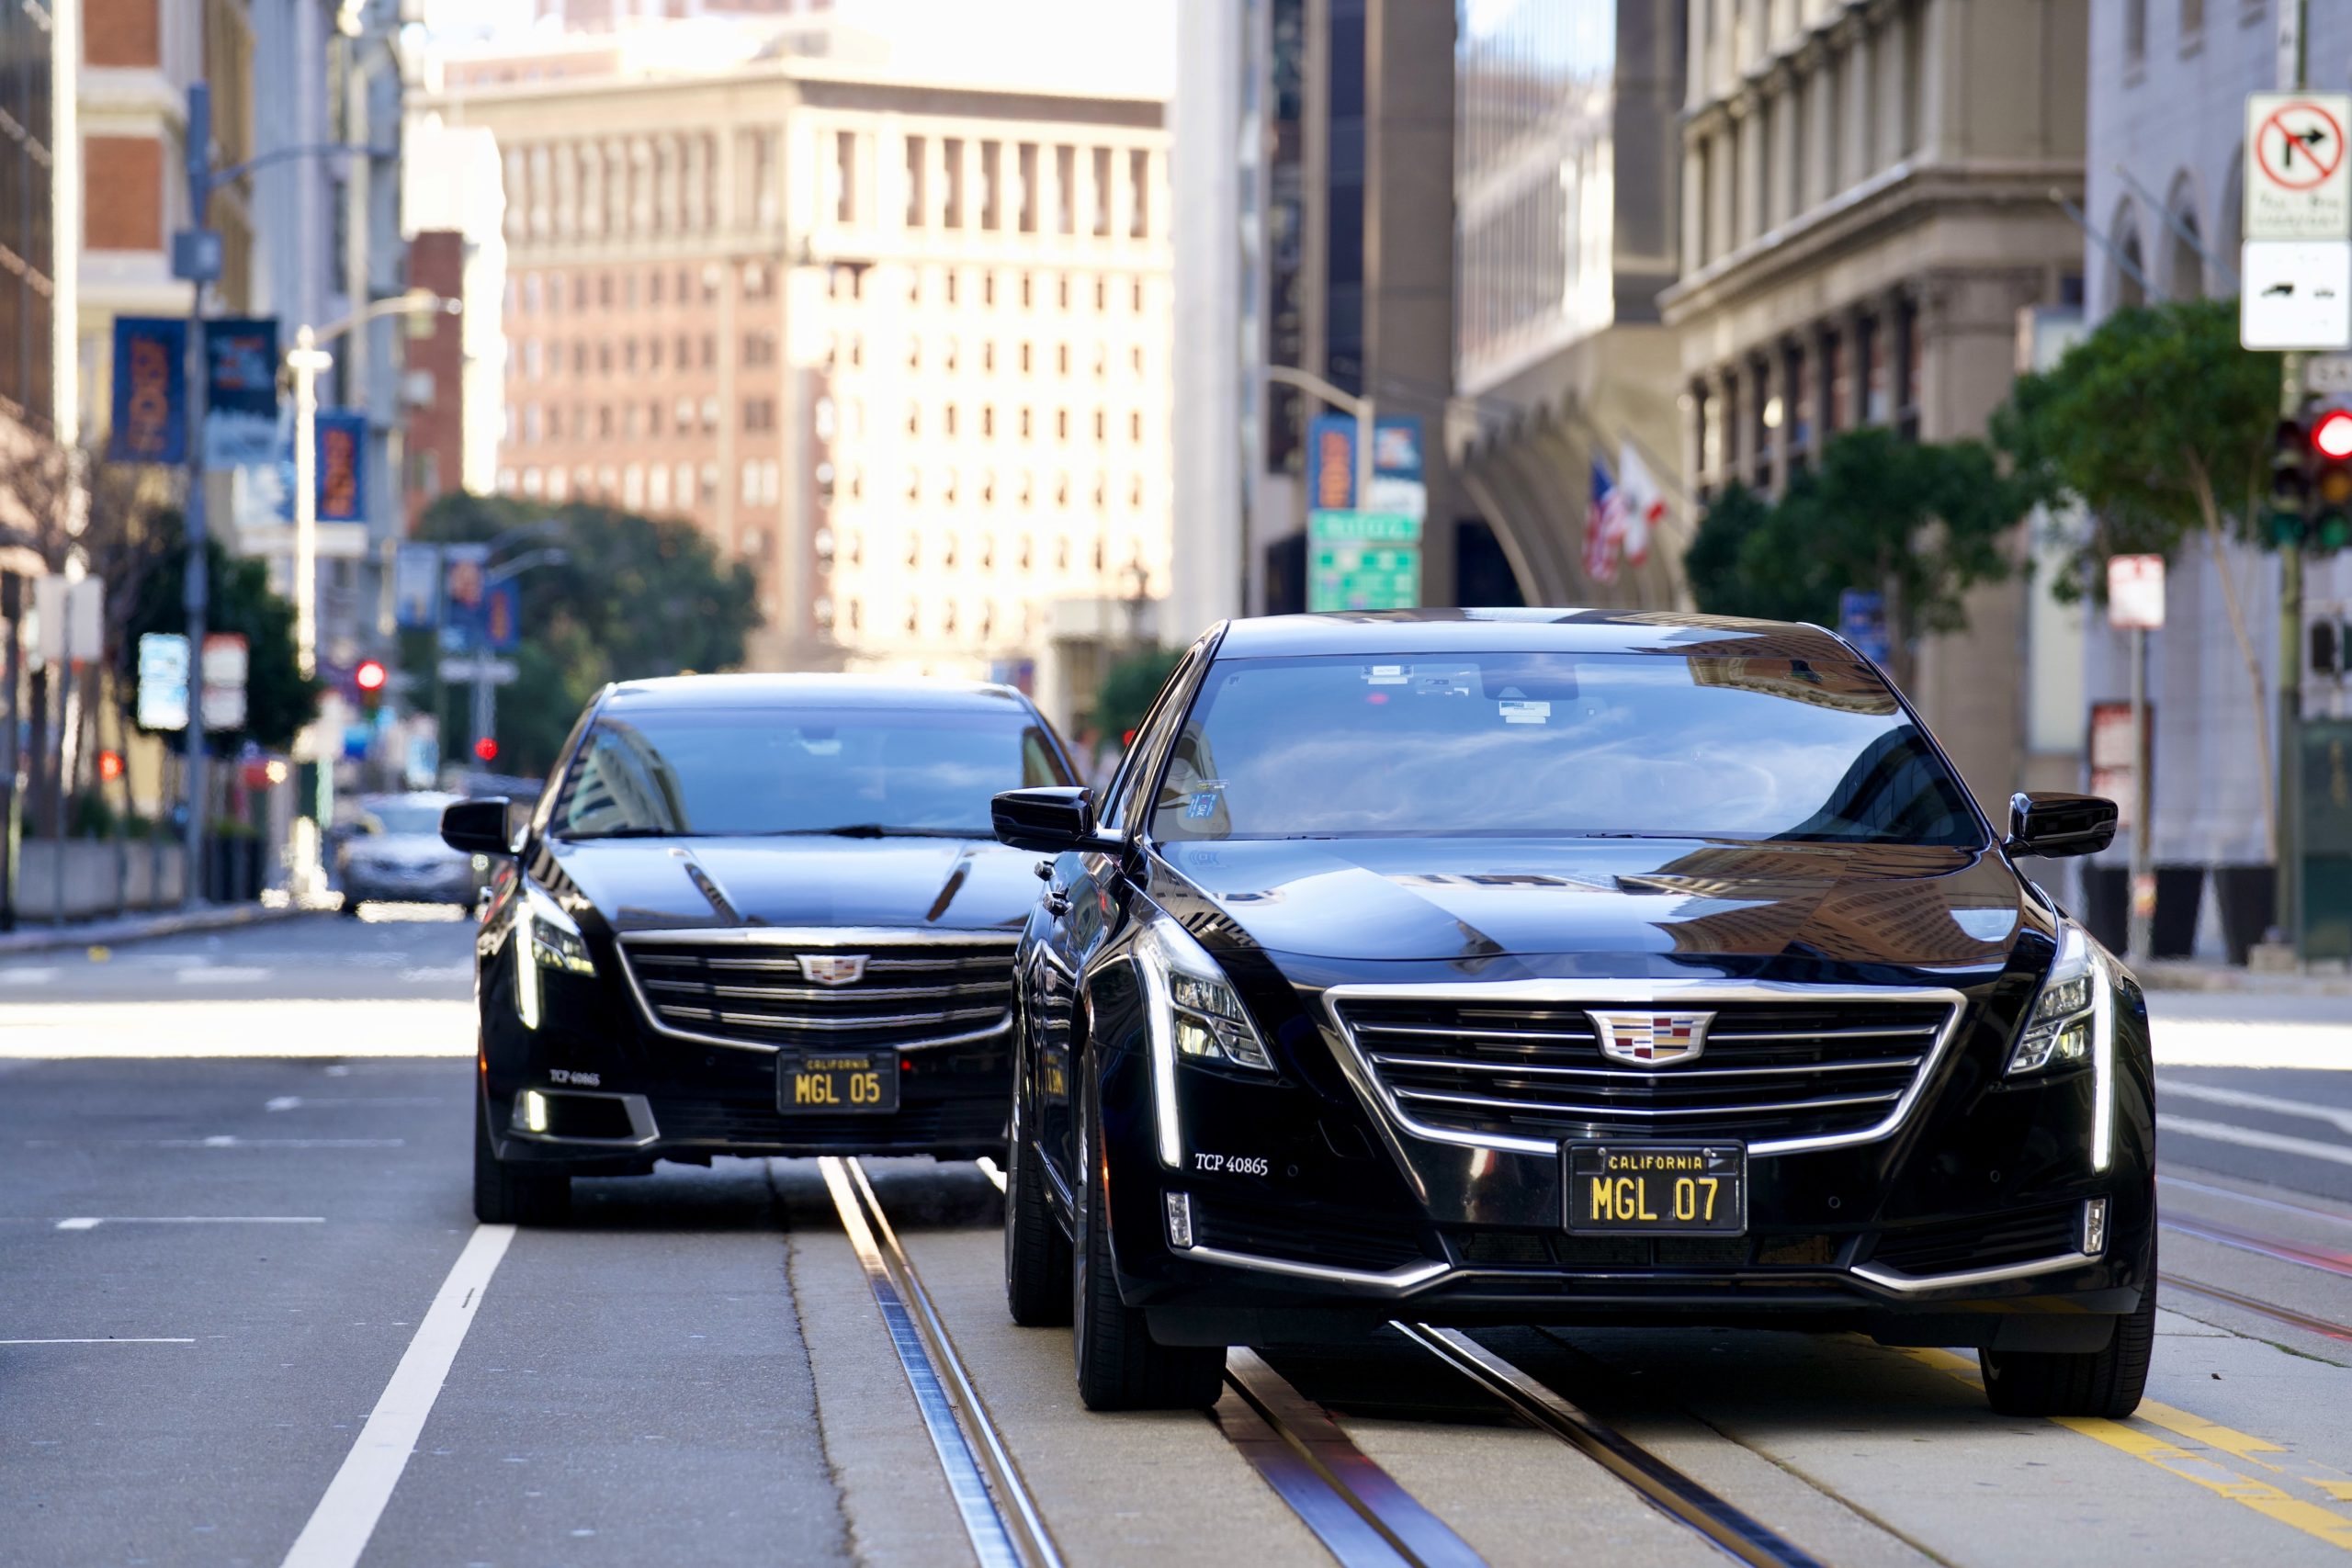 About MGL Limos, two Cadillac sedans driving in SF